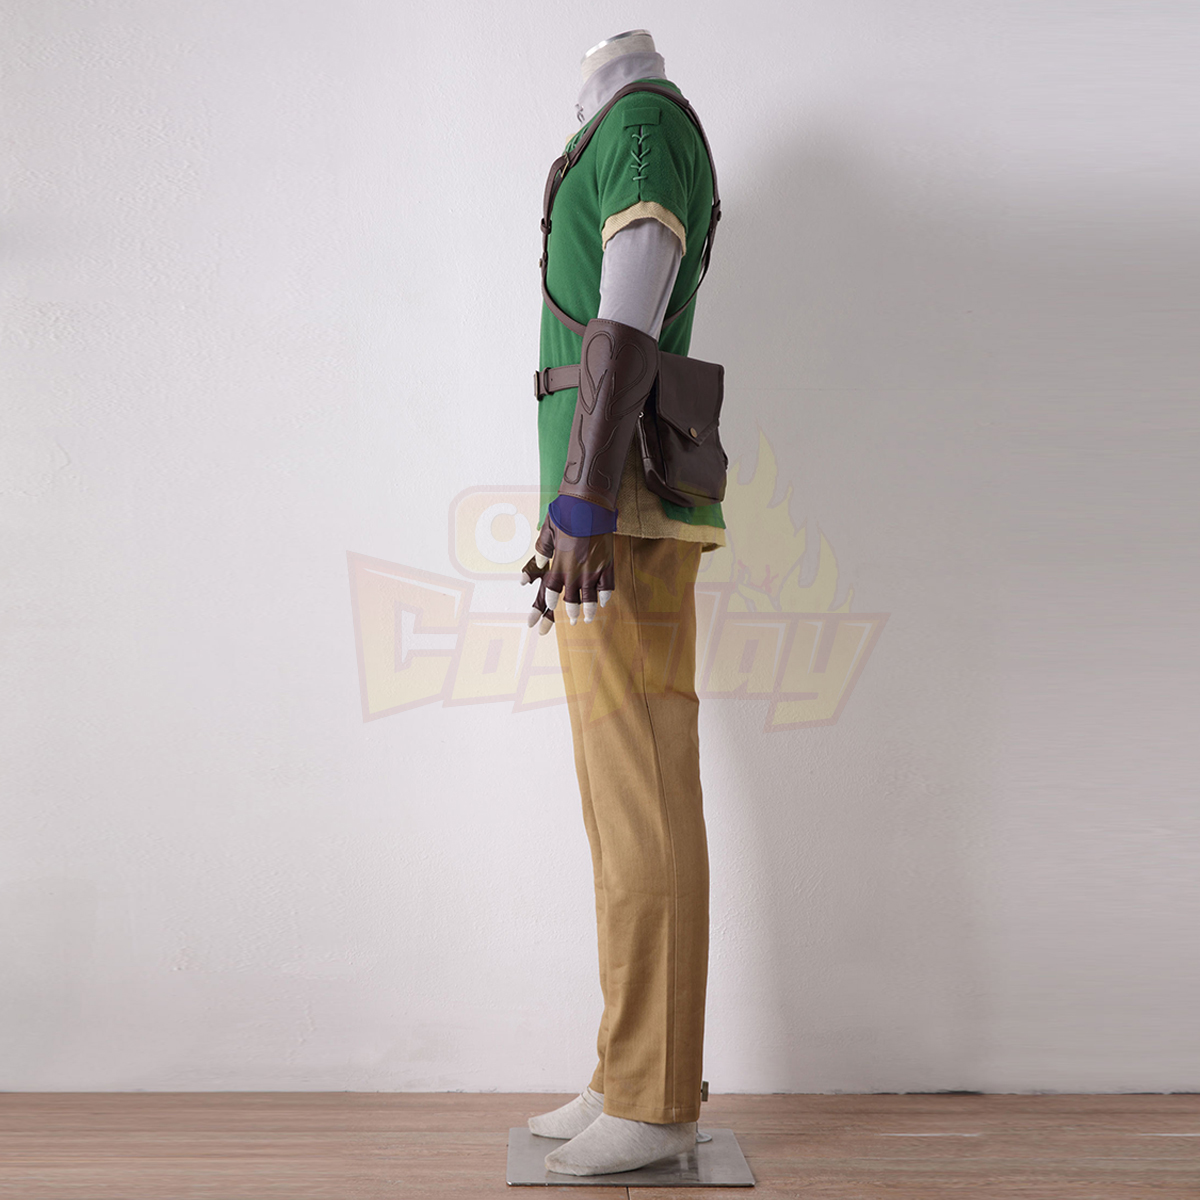 The Legend of Zelda Twilight Princess Link 4TH Cosplay Costumes Deluxe Edition